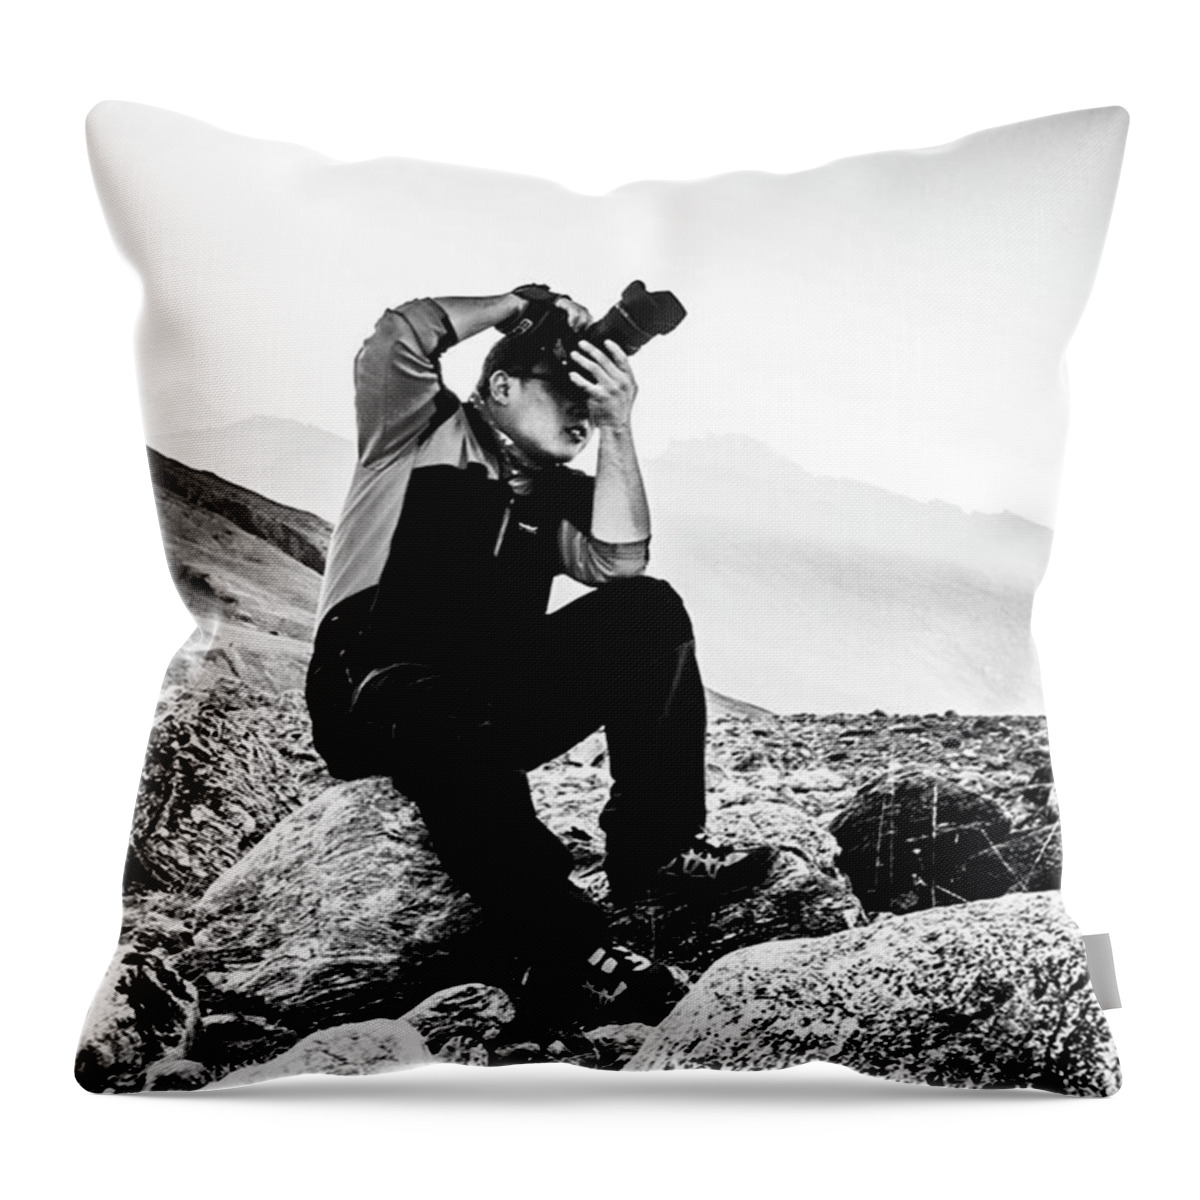  Throw Pillow featuring the photograph Phototravels by Aleck Cartwright